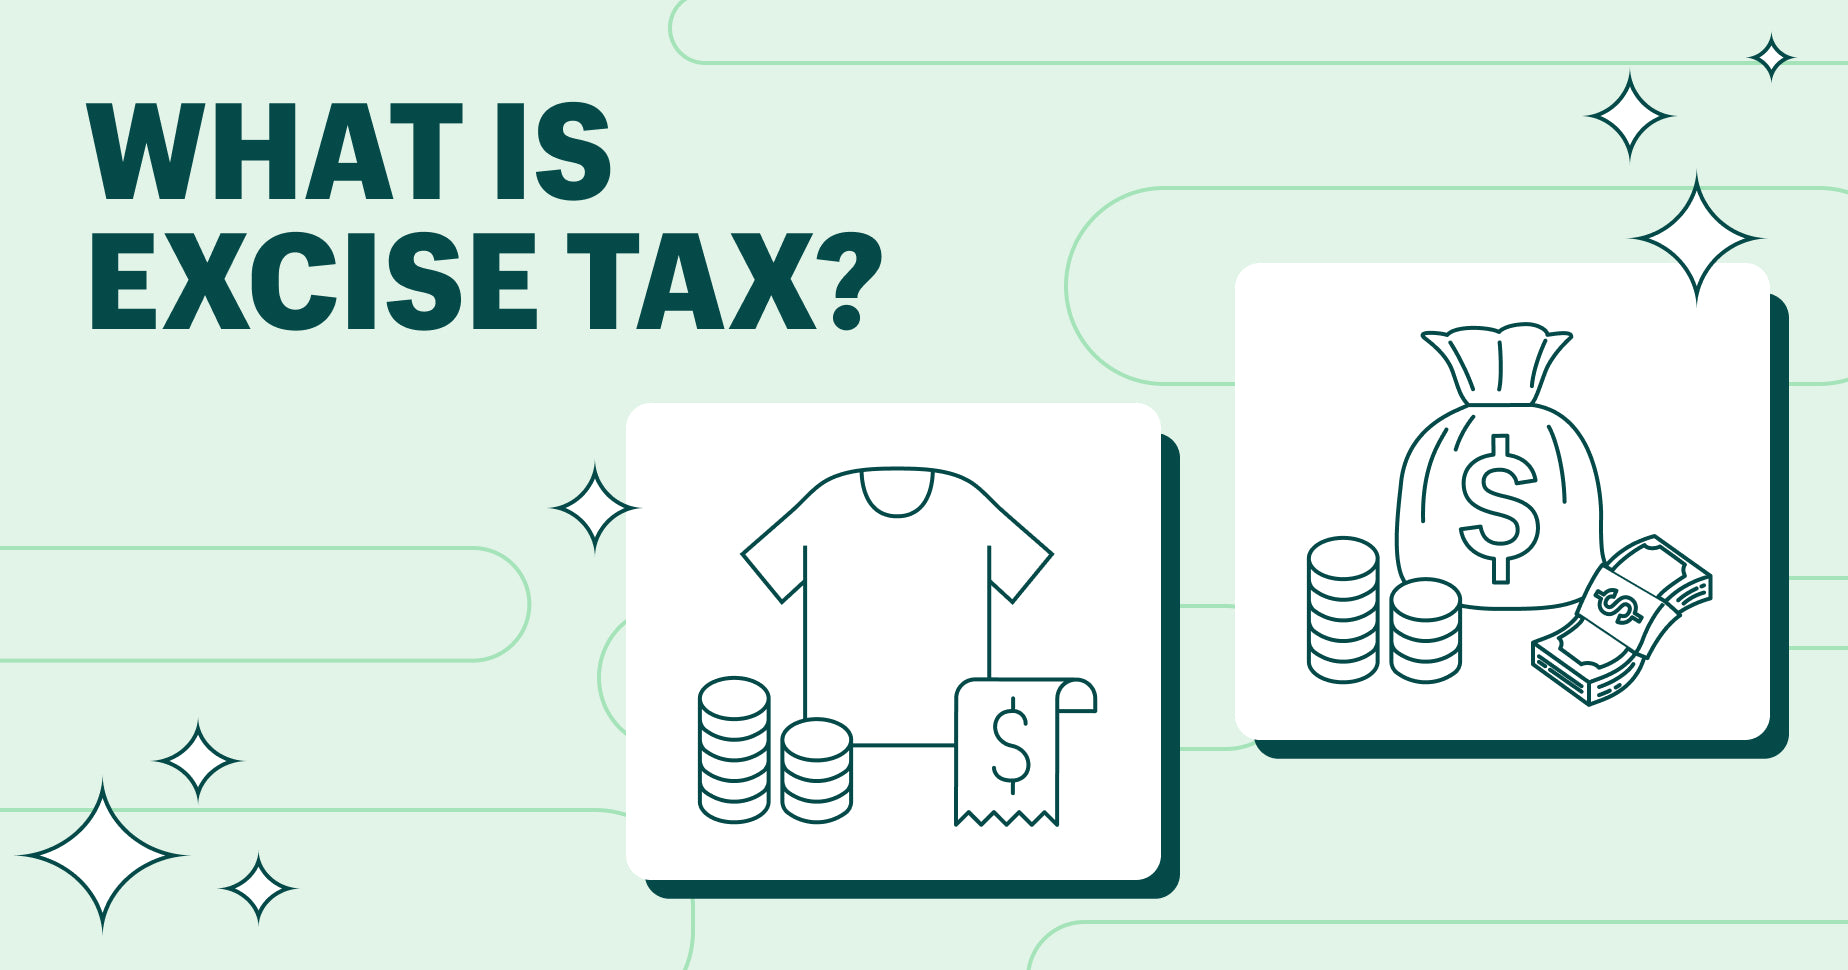 image with text that says what is excise tax?